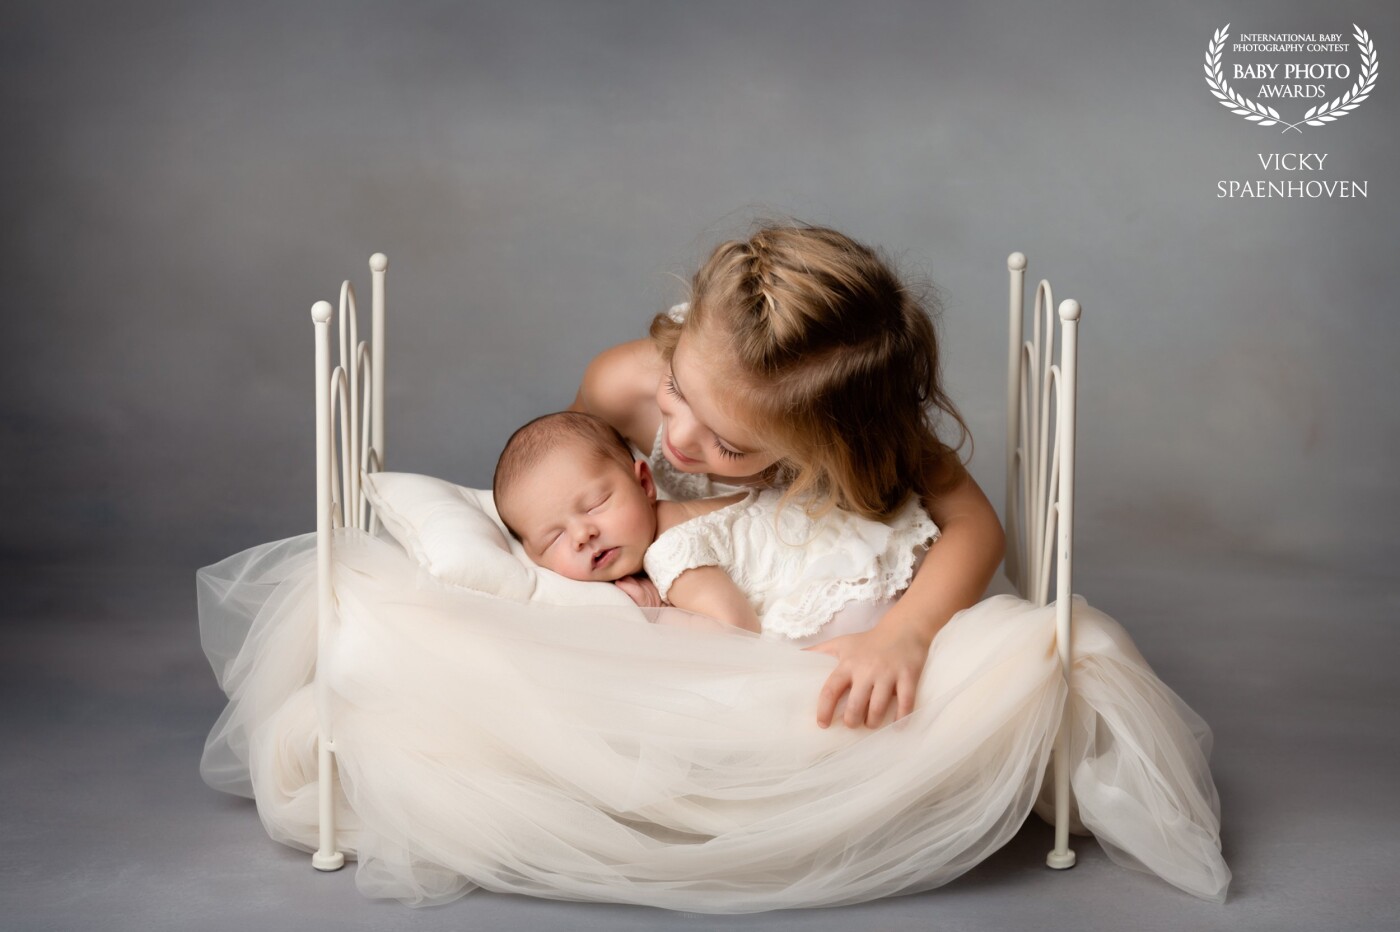 How beautiful are these two sisters? I love the connection between them and the use of soft light and soft color tones. It's not easy to photograph young children together, but if you have patience, you can create something very special.